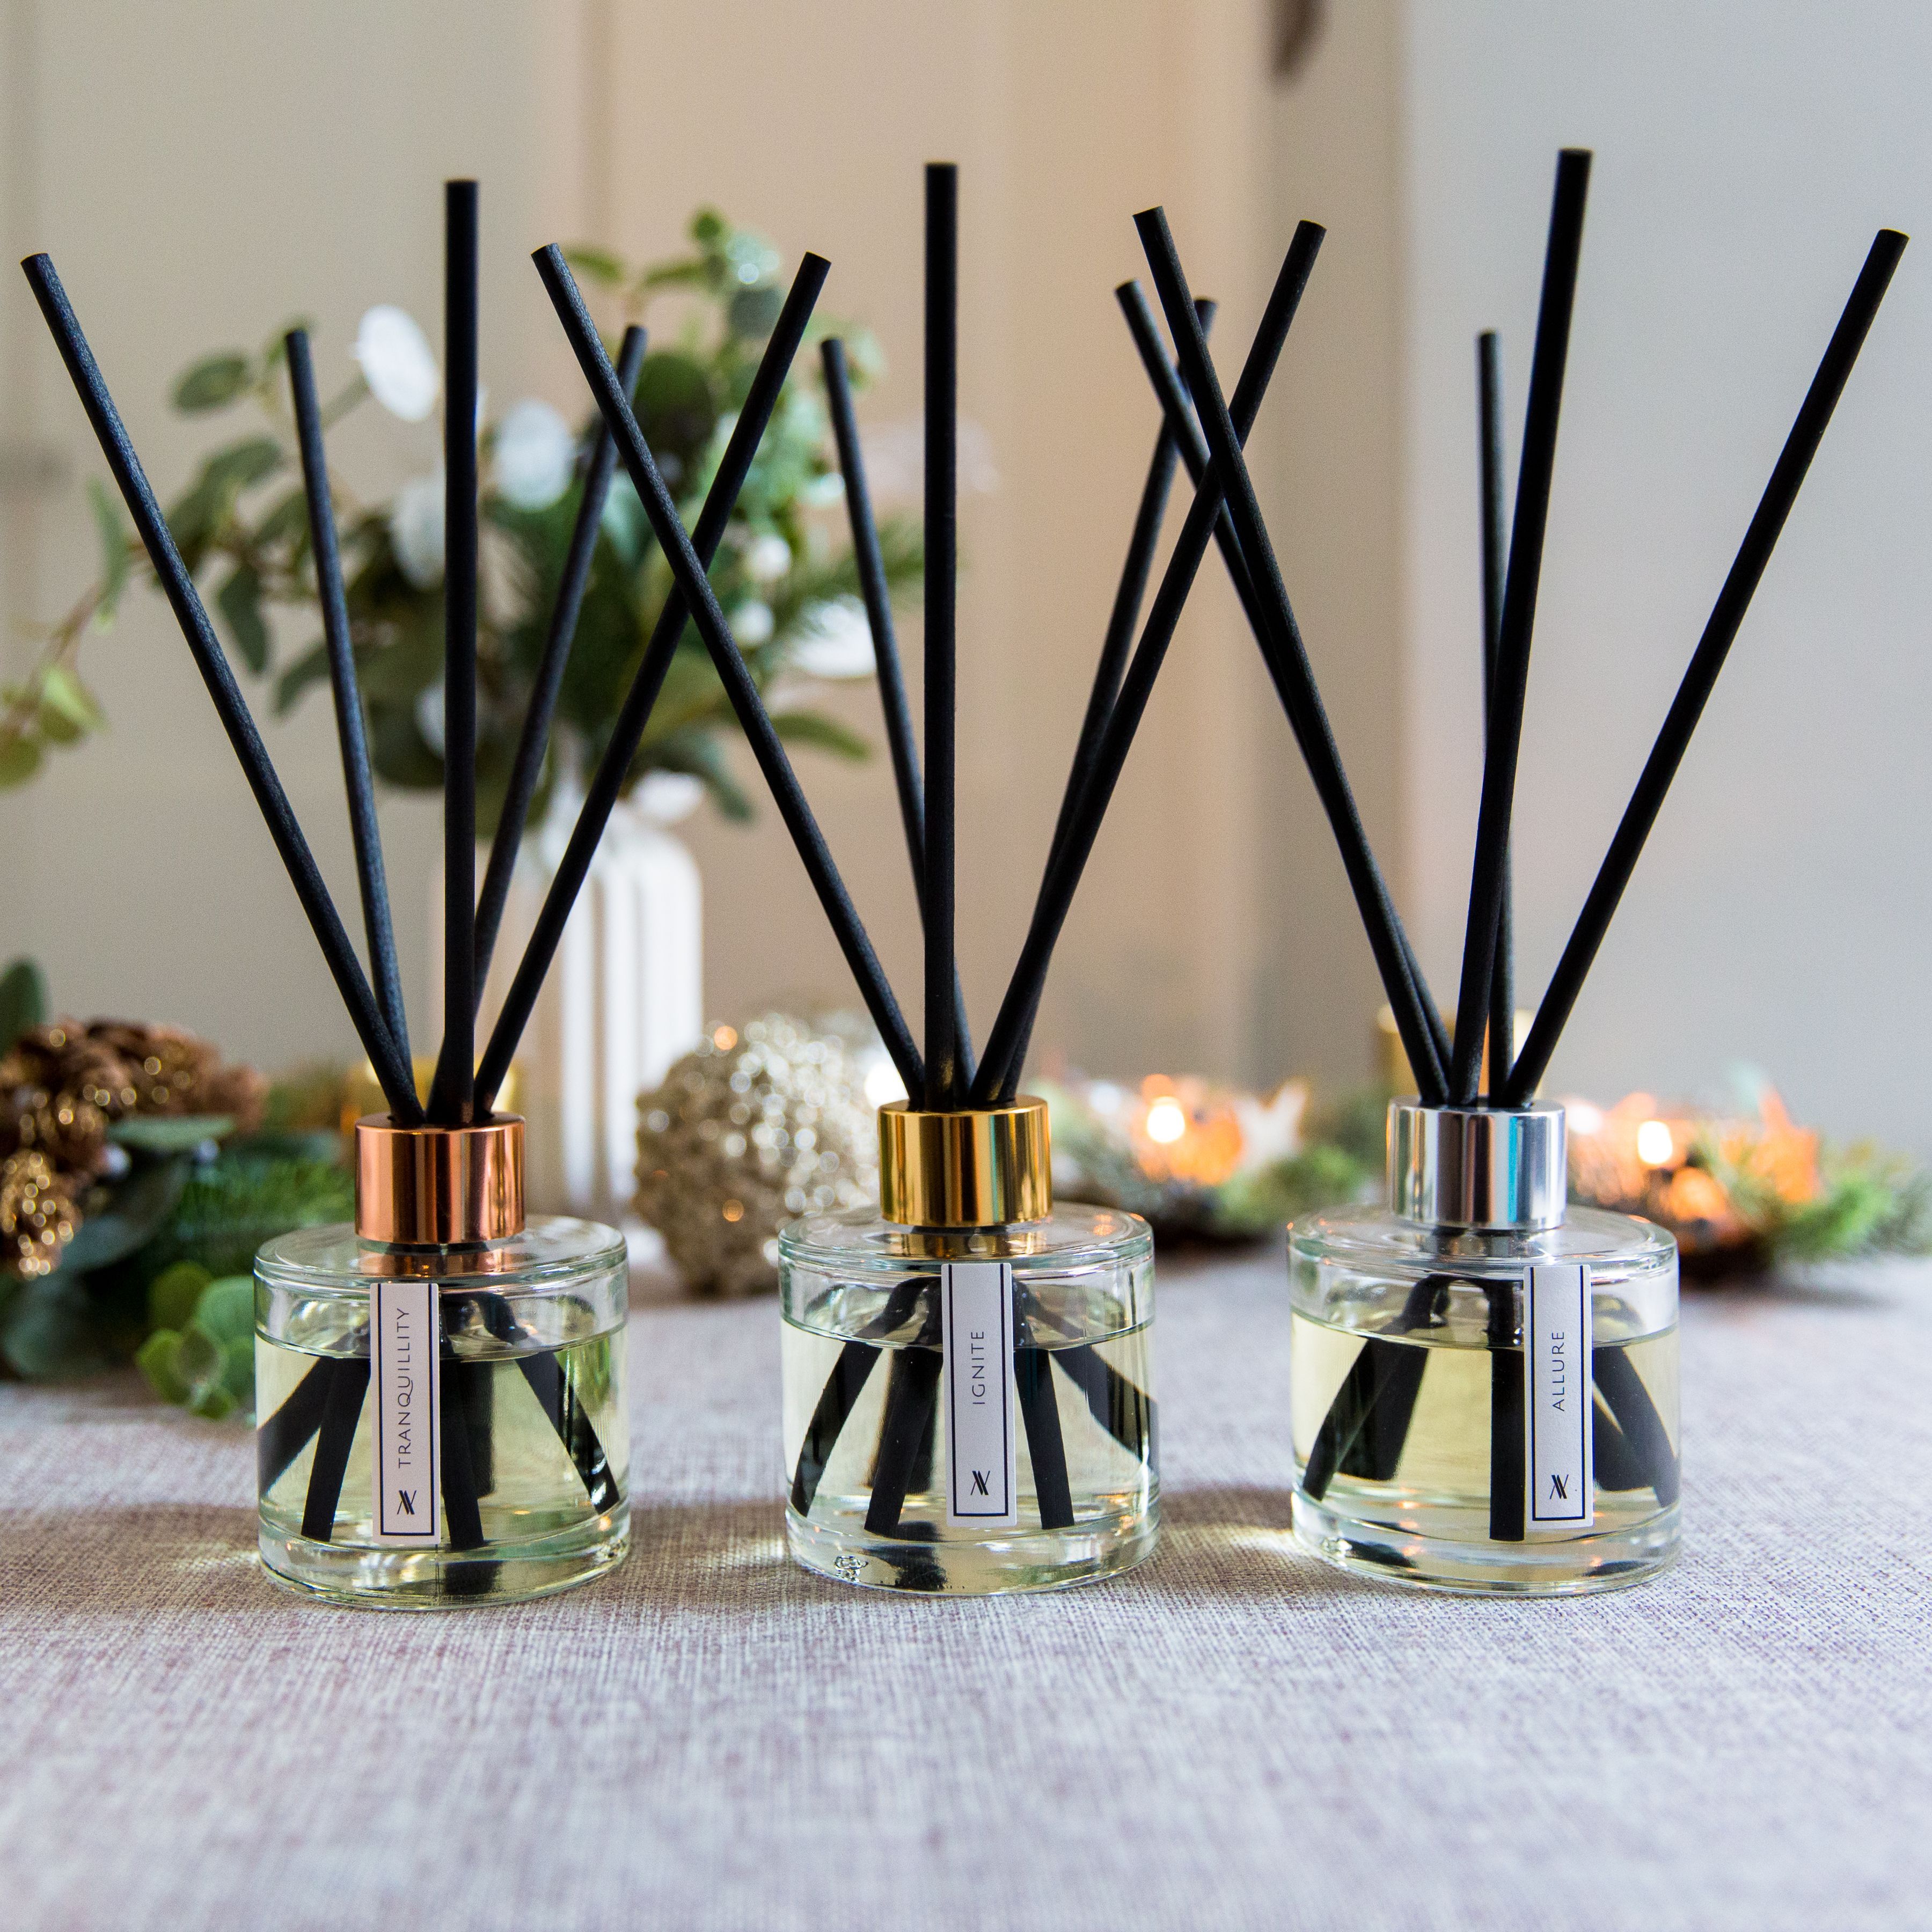 Long Lasting Eco-Luxury 200ml Reed Diffuser